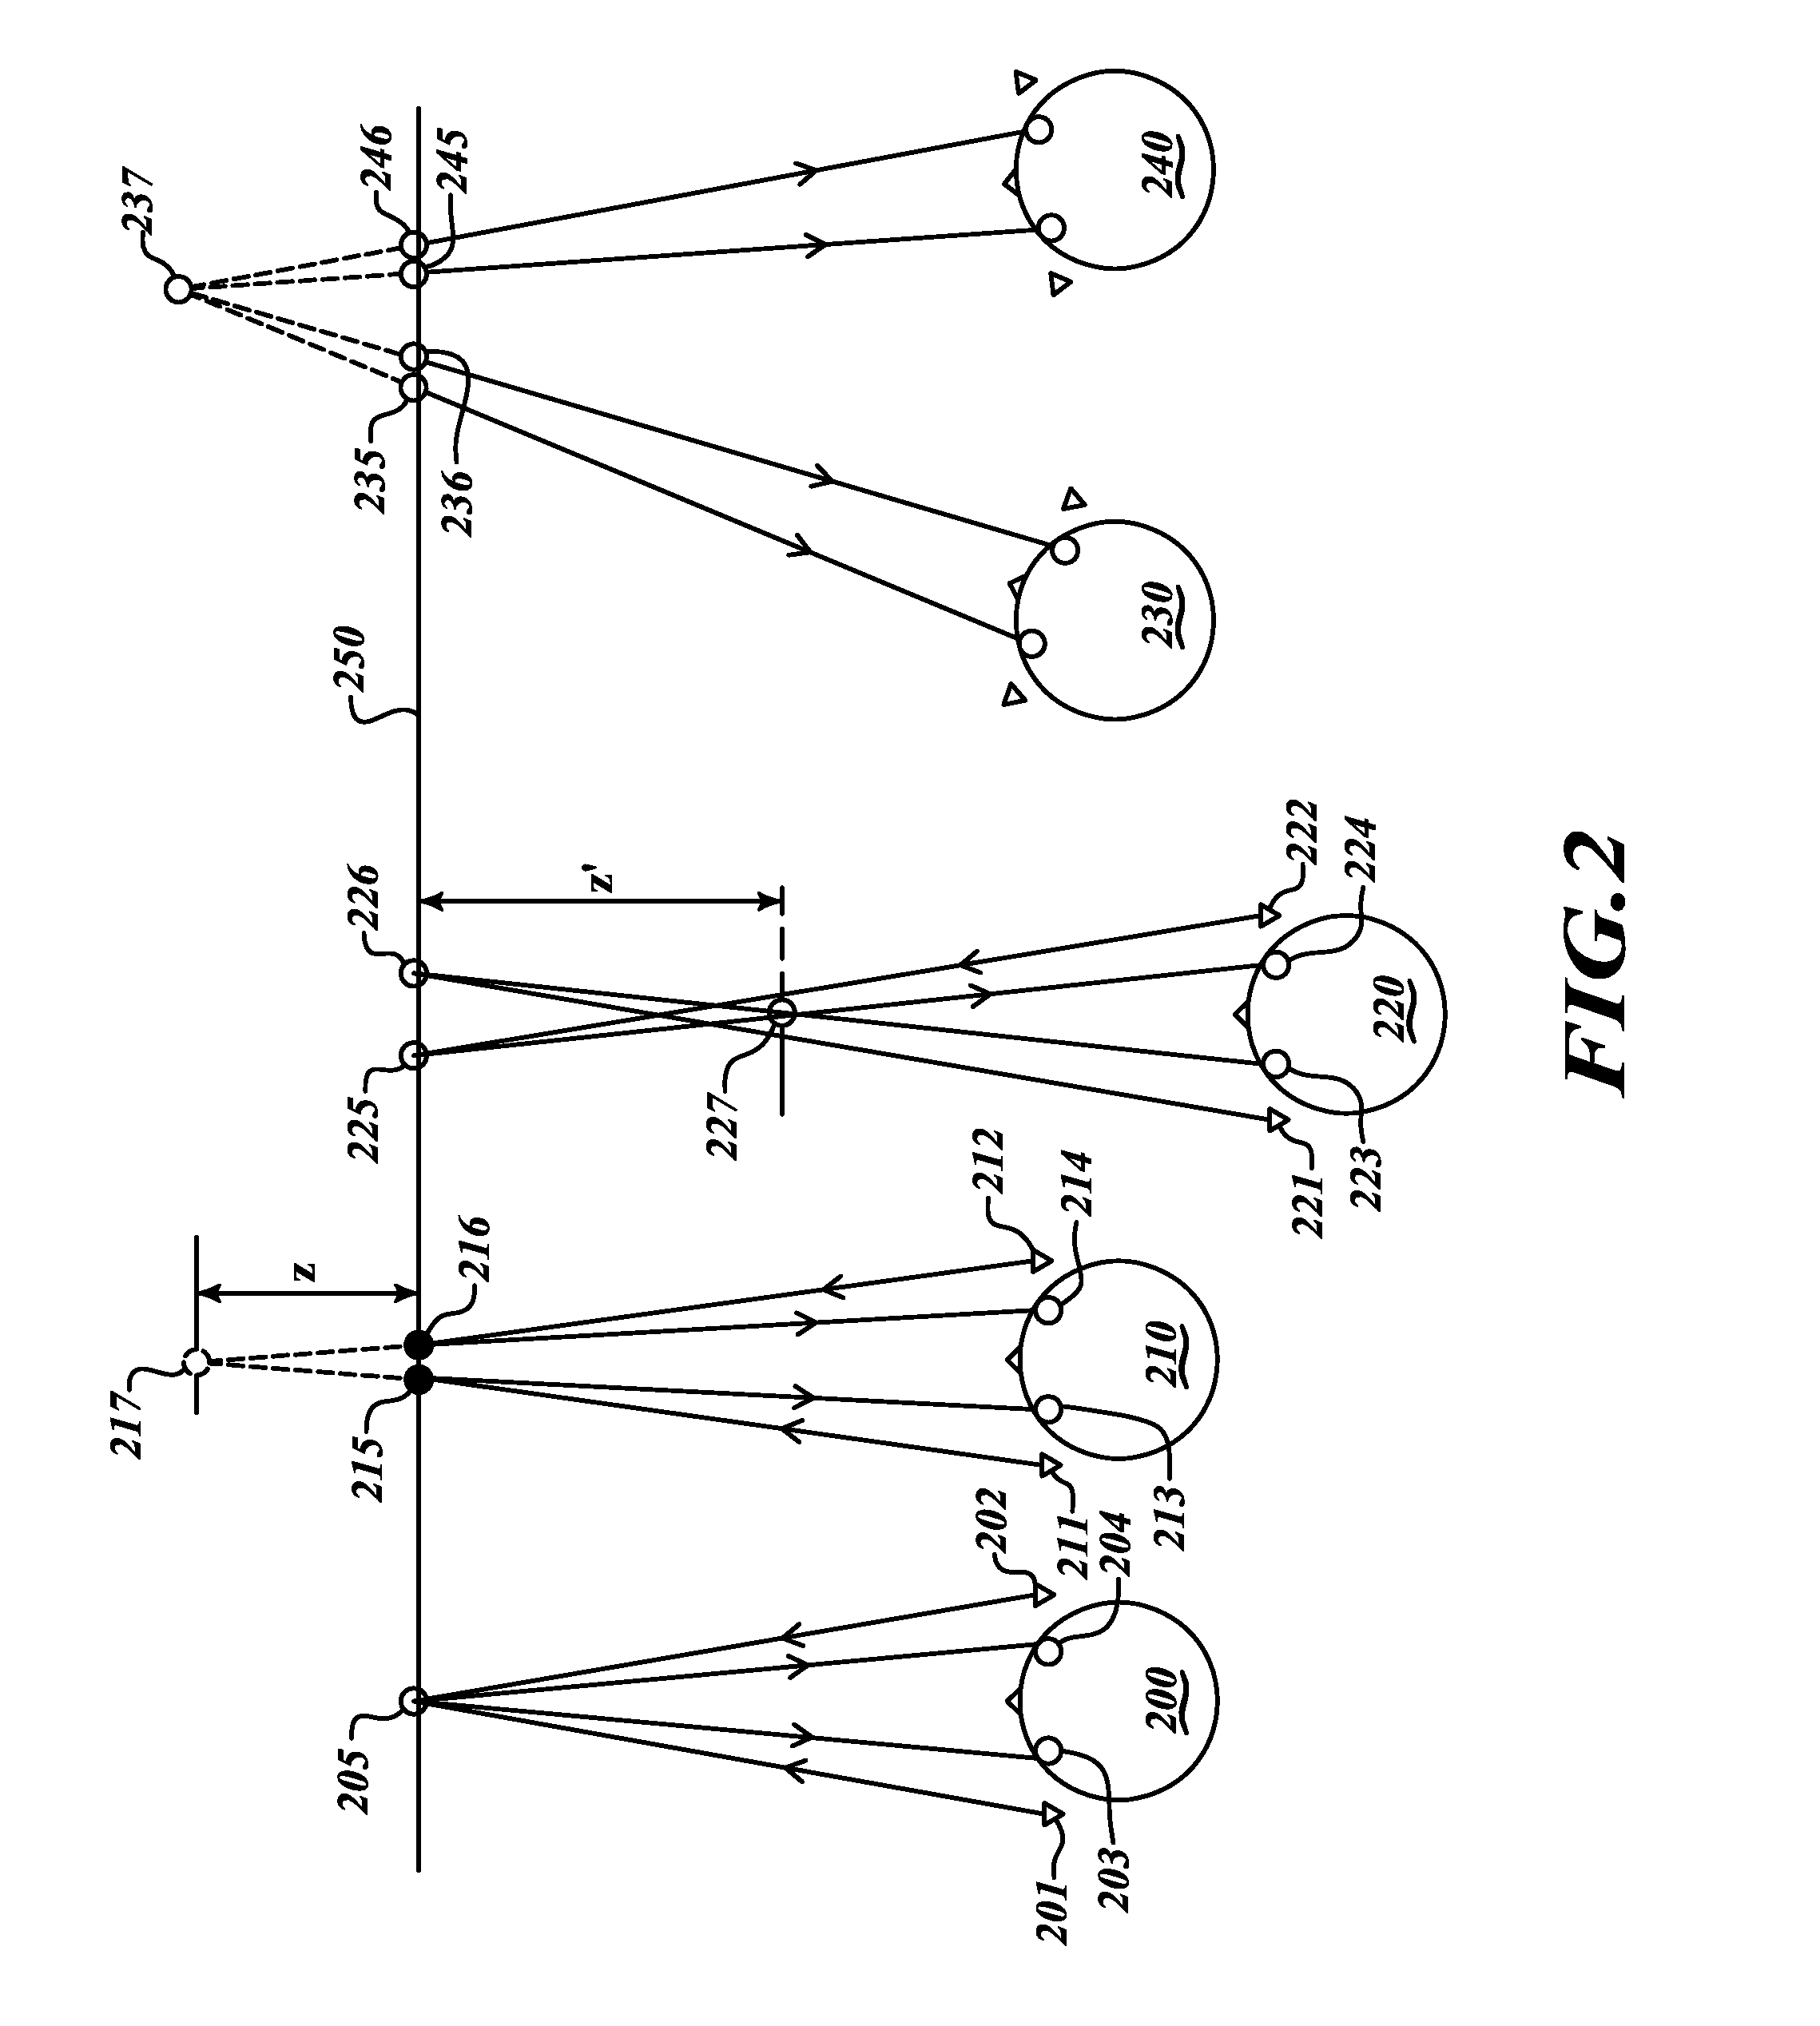 System and method for 3-d projection and enhancements for interactivity